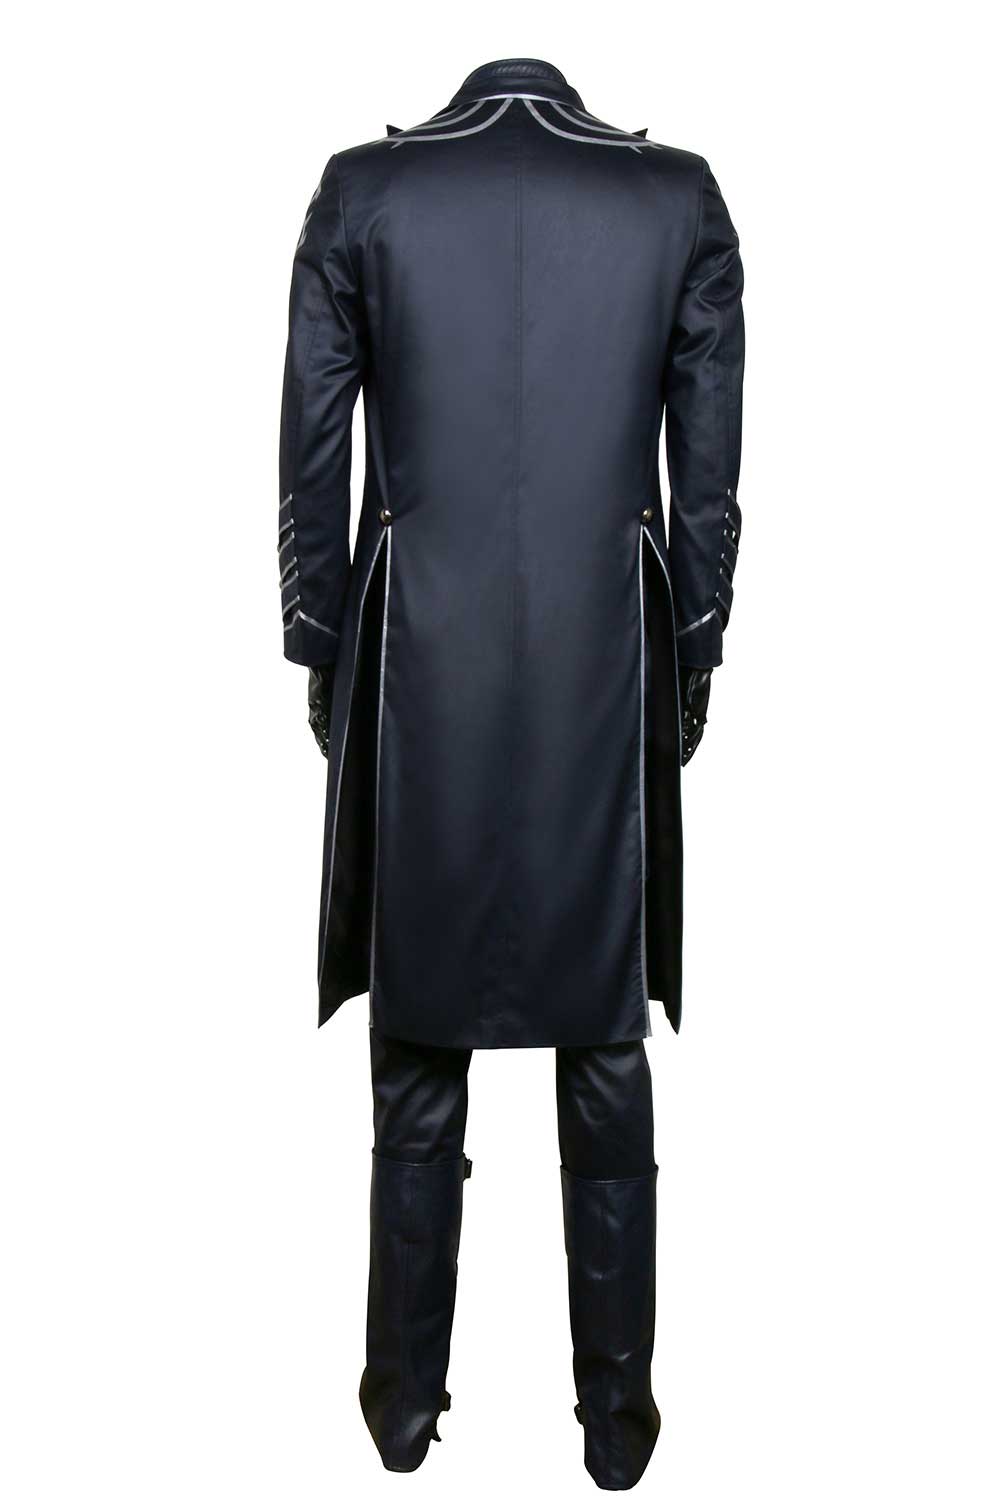 Devil May Cry5 Vergil Cosplay Costume Men Coat Whole Set Suit